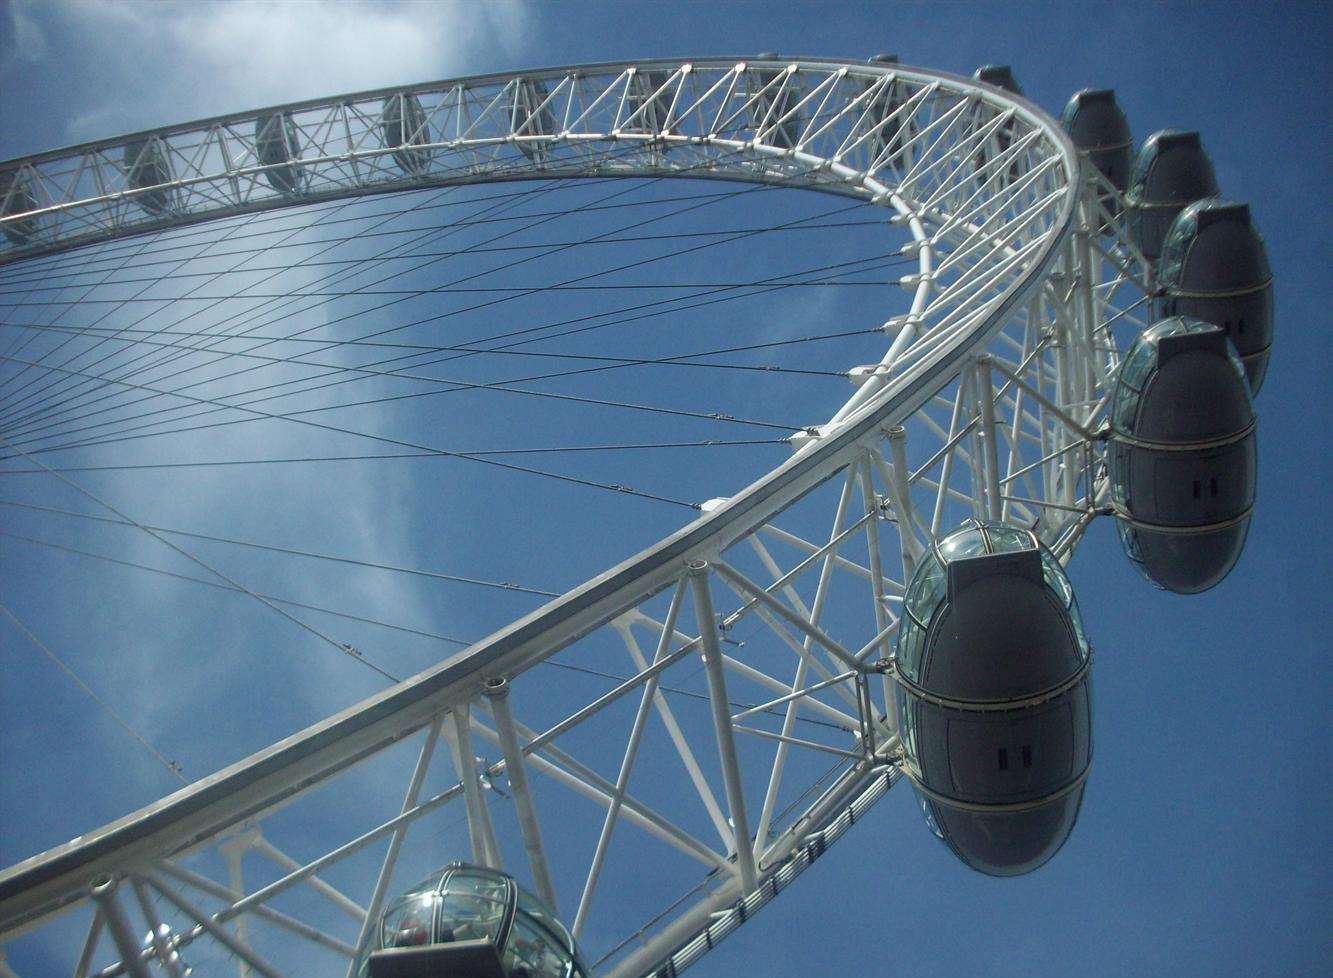 Could the Kent Eye look like this?